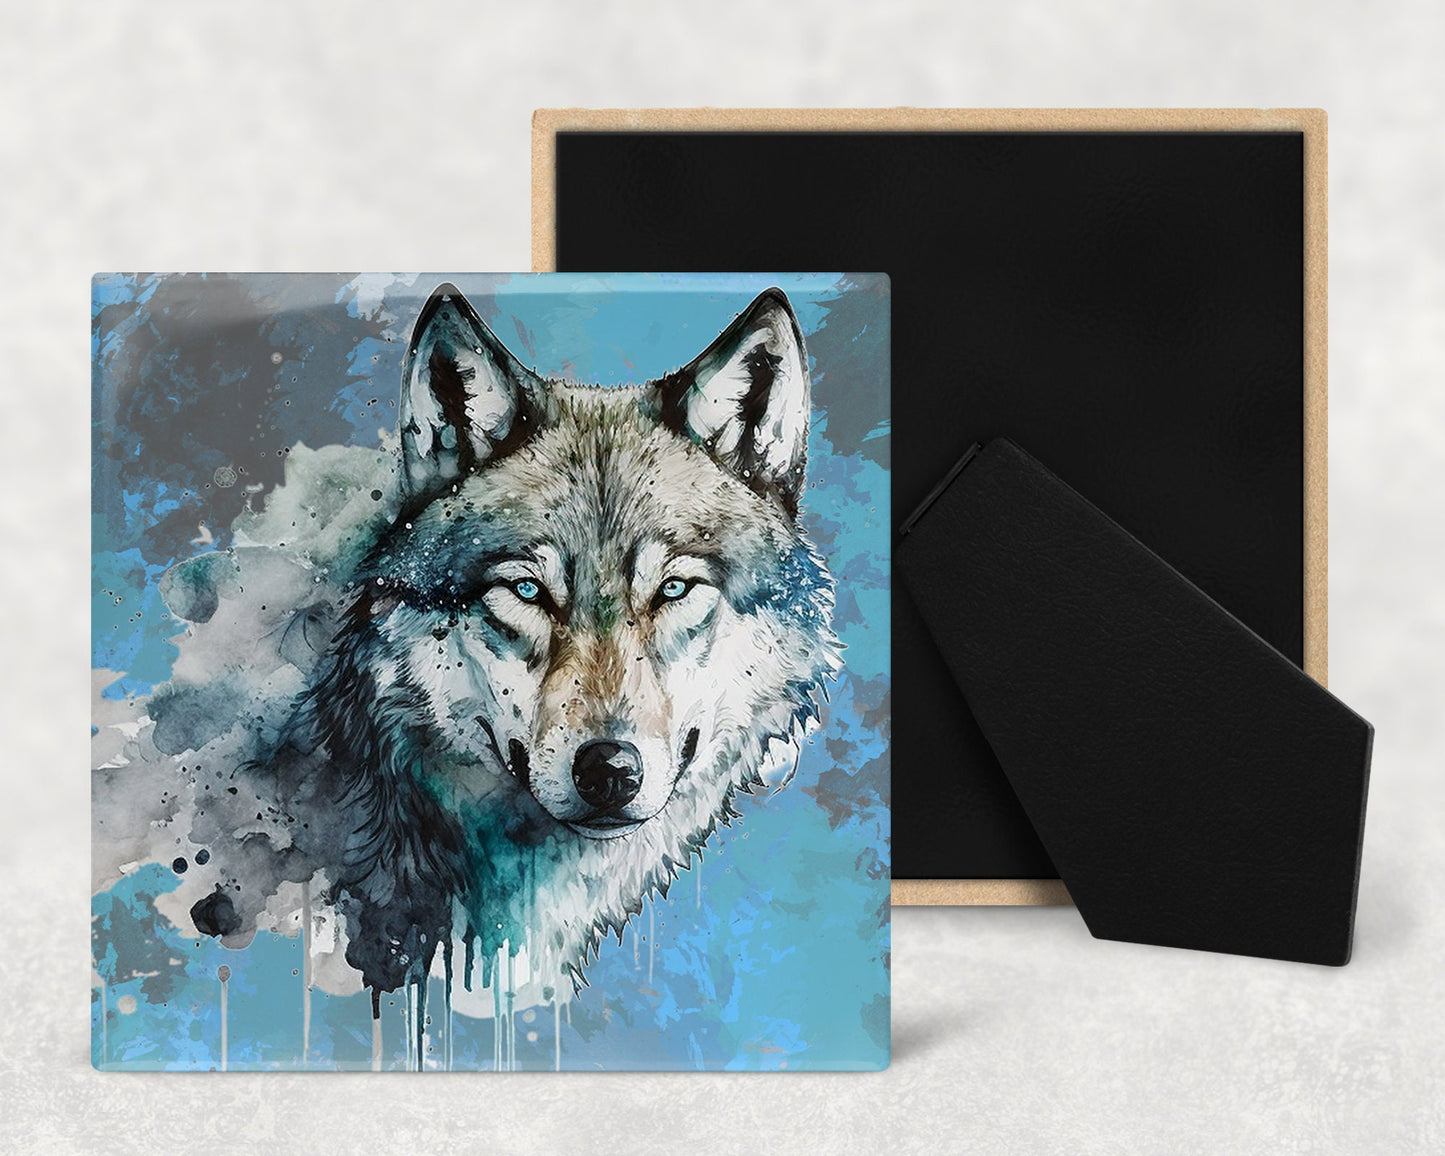 Watercolor Wolf Splatter Portrait Art Decorative Ceramic Tile with Optional Easel Back - Available in 3 Sizes